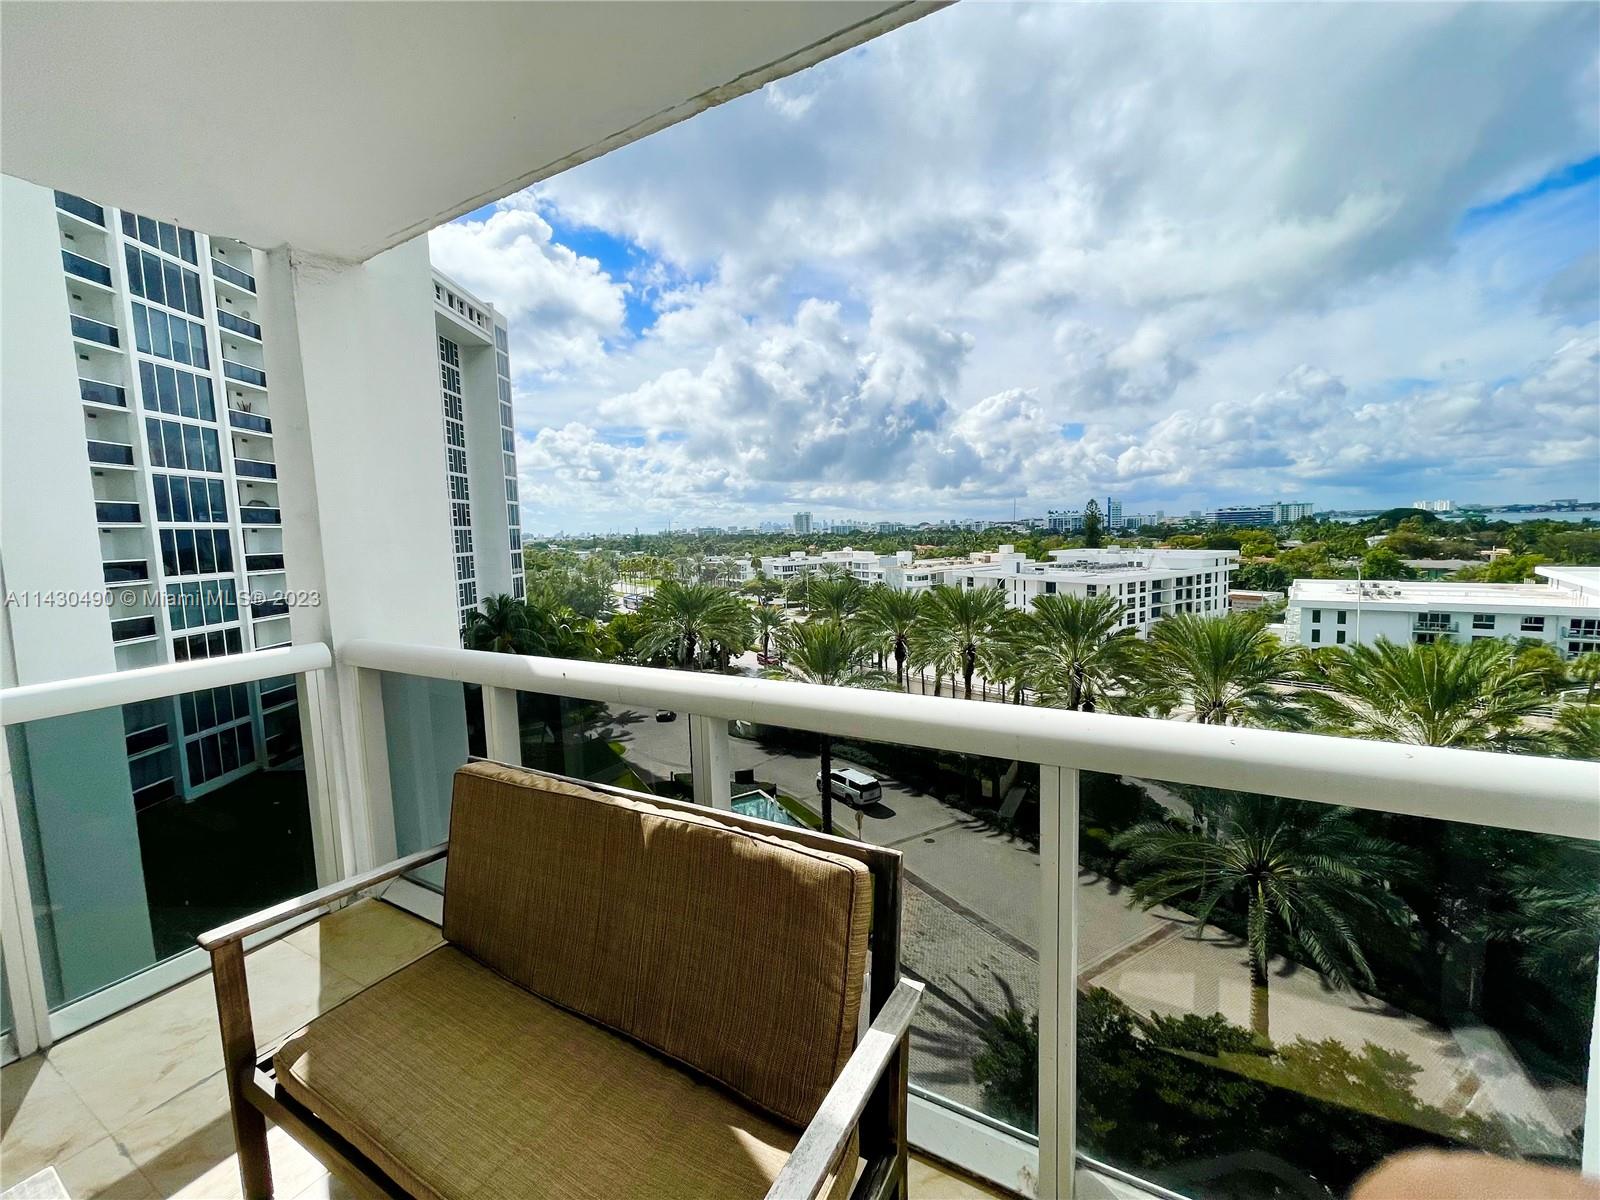 Photo 28 of Harbour House Apt 630 in Bal Harbour - MLS A11430490